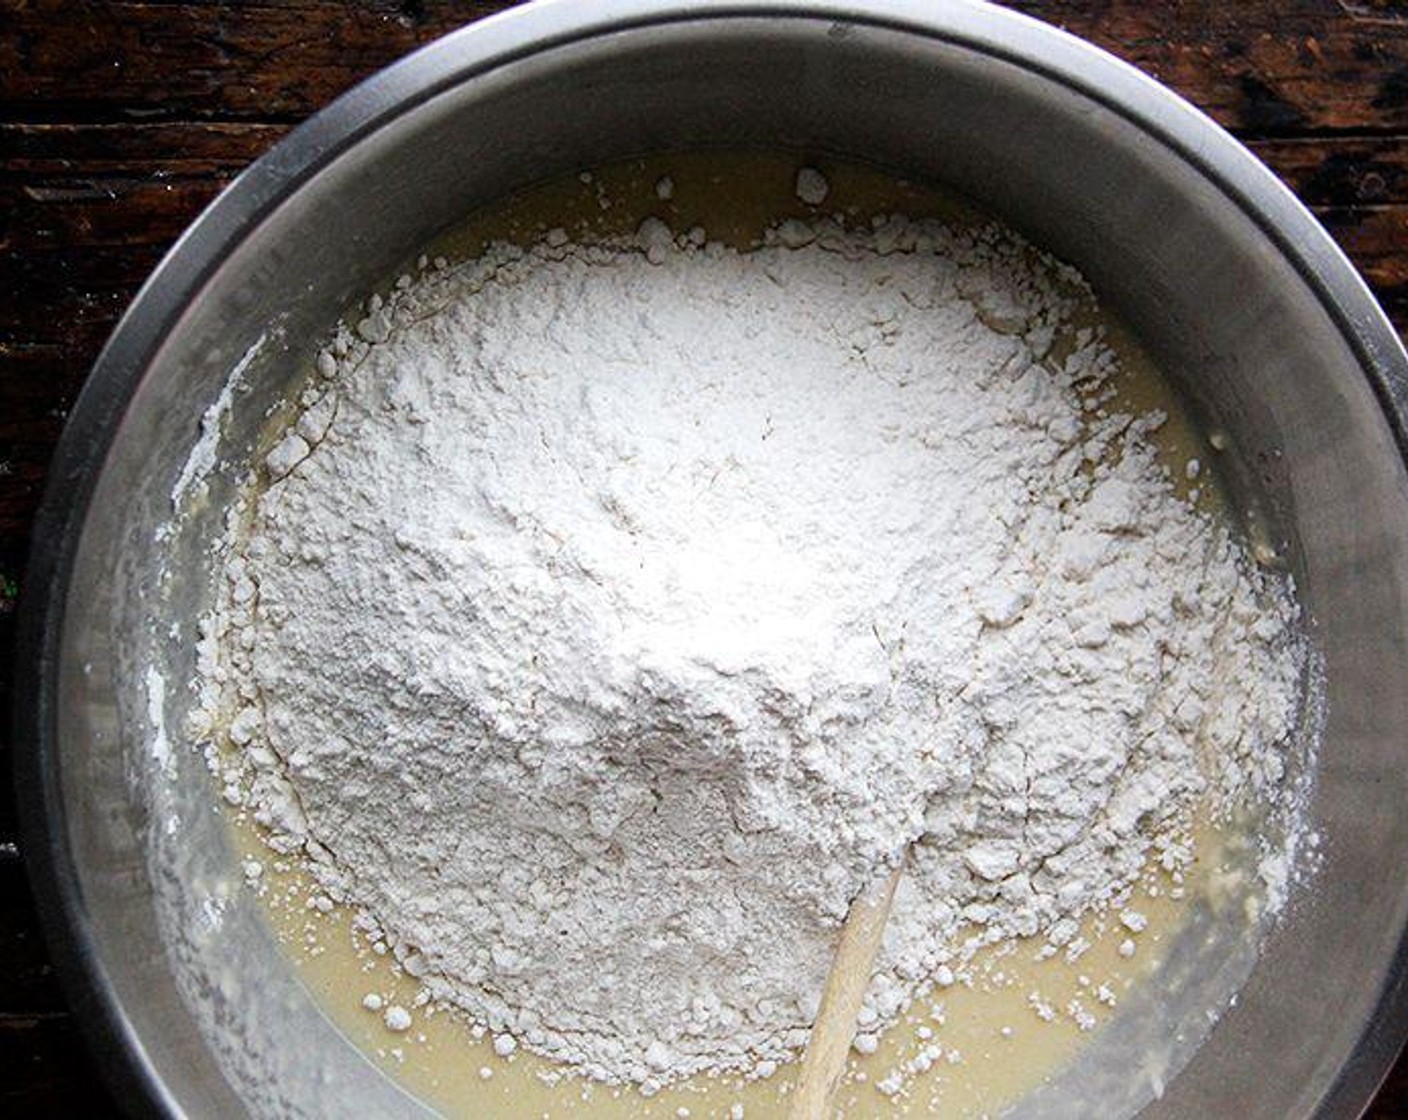 step 1 Make the sponge: Whisk All-Purpose Flour (1 cup) with the Instant Dry Yeast (1/2 Tbsp) and stir in the Water (1 cup) until the sponge is smooth.